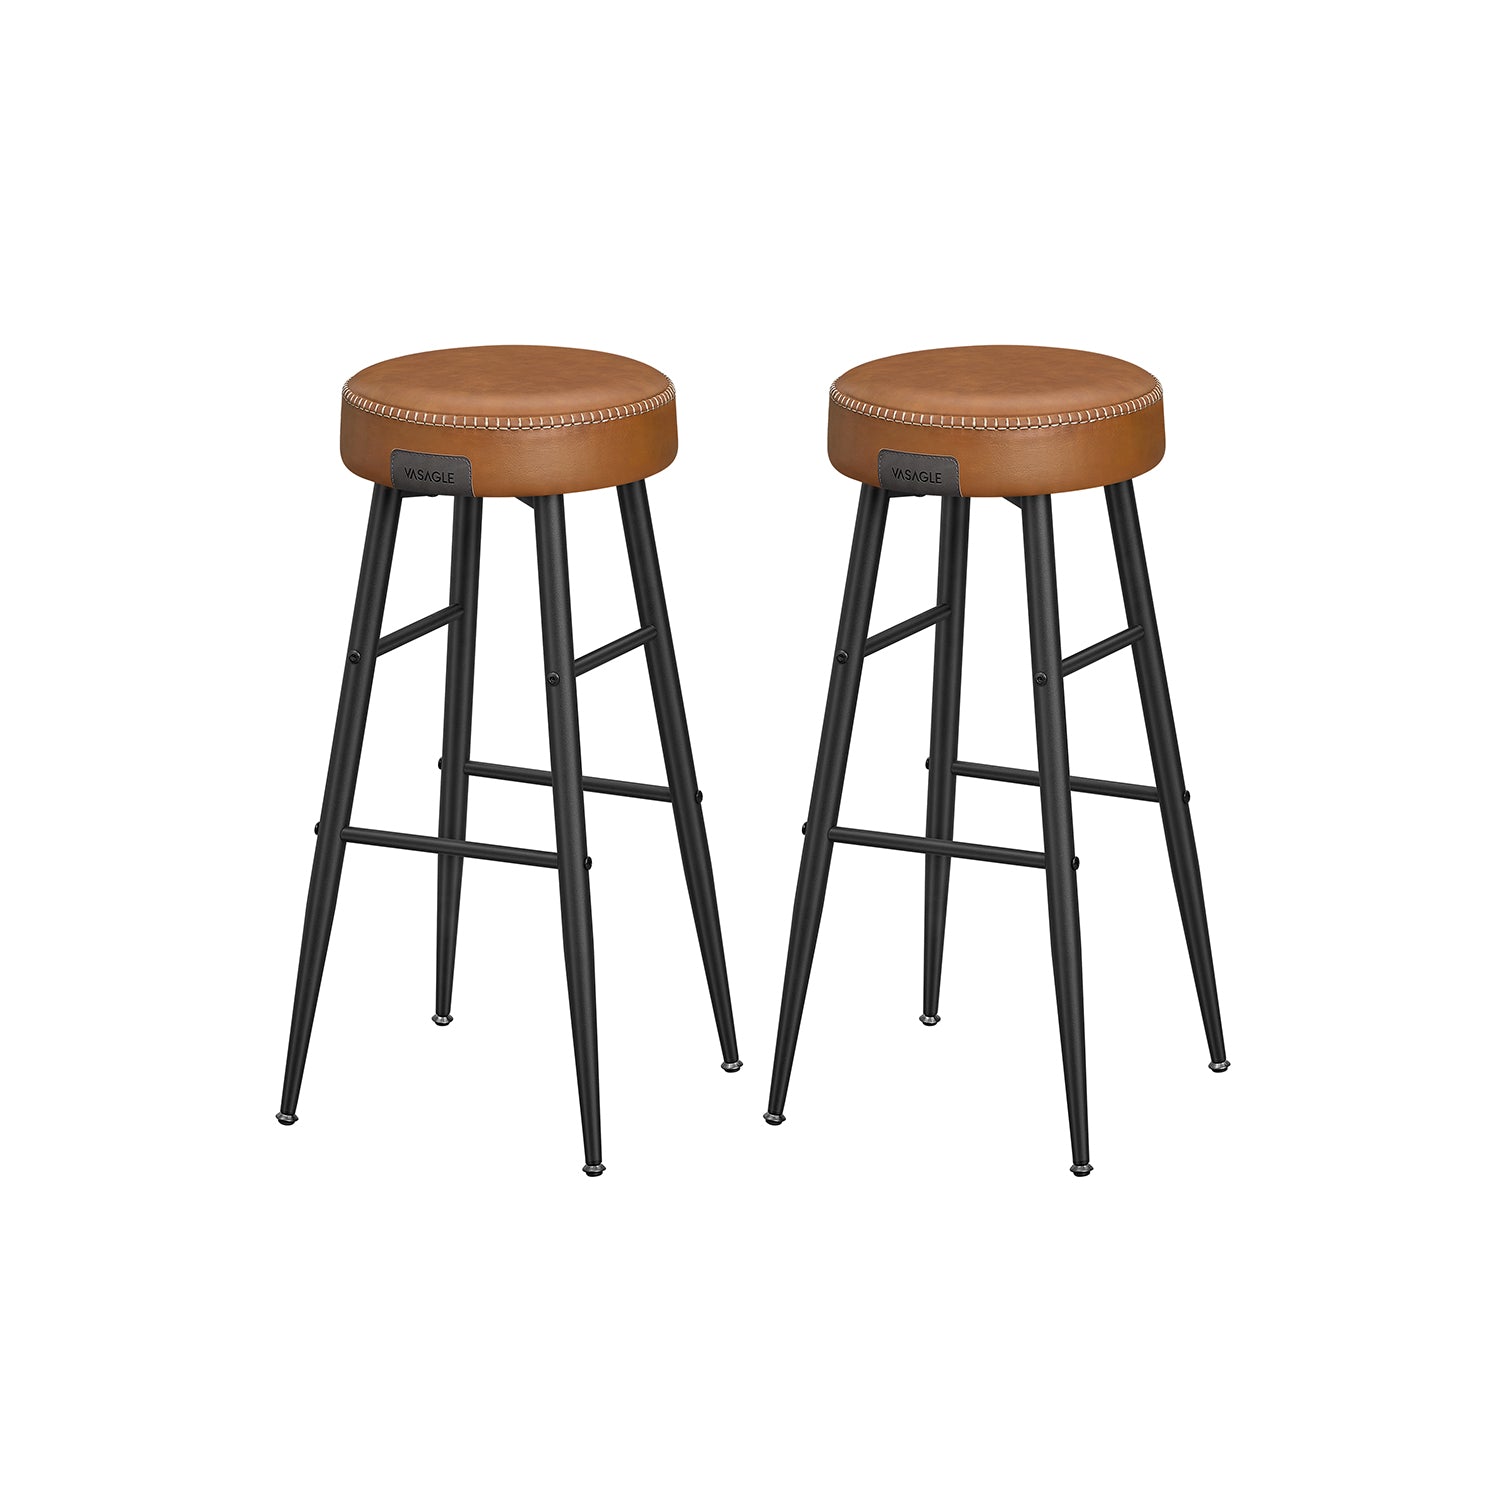  VASAGLE EKHO Collection - Bar Stools Set Of 2, Kitchen  Counter Stools, Breakfast Stools, Synthetic Leather